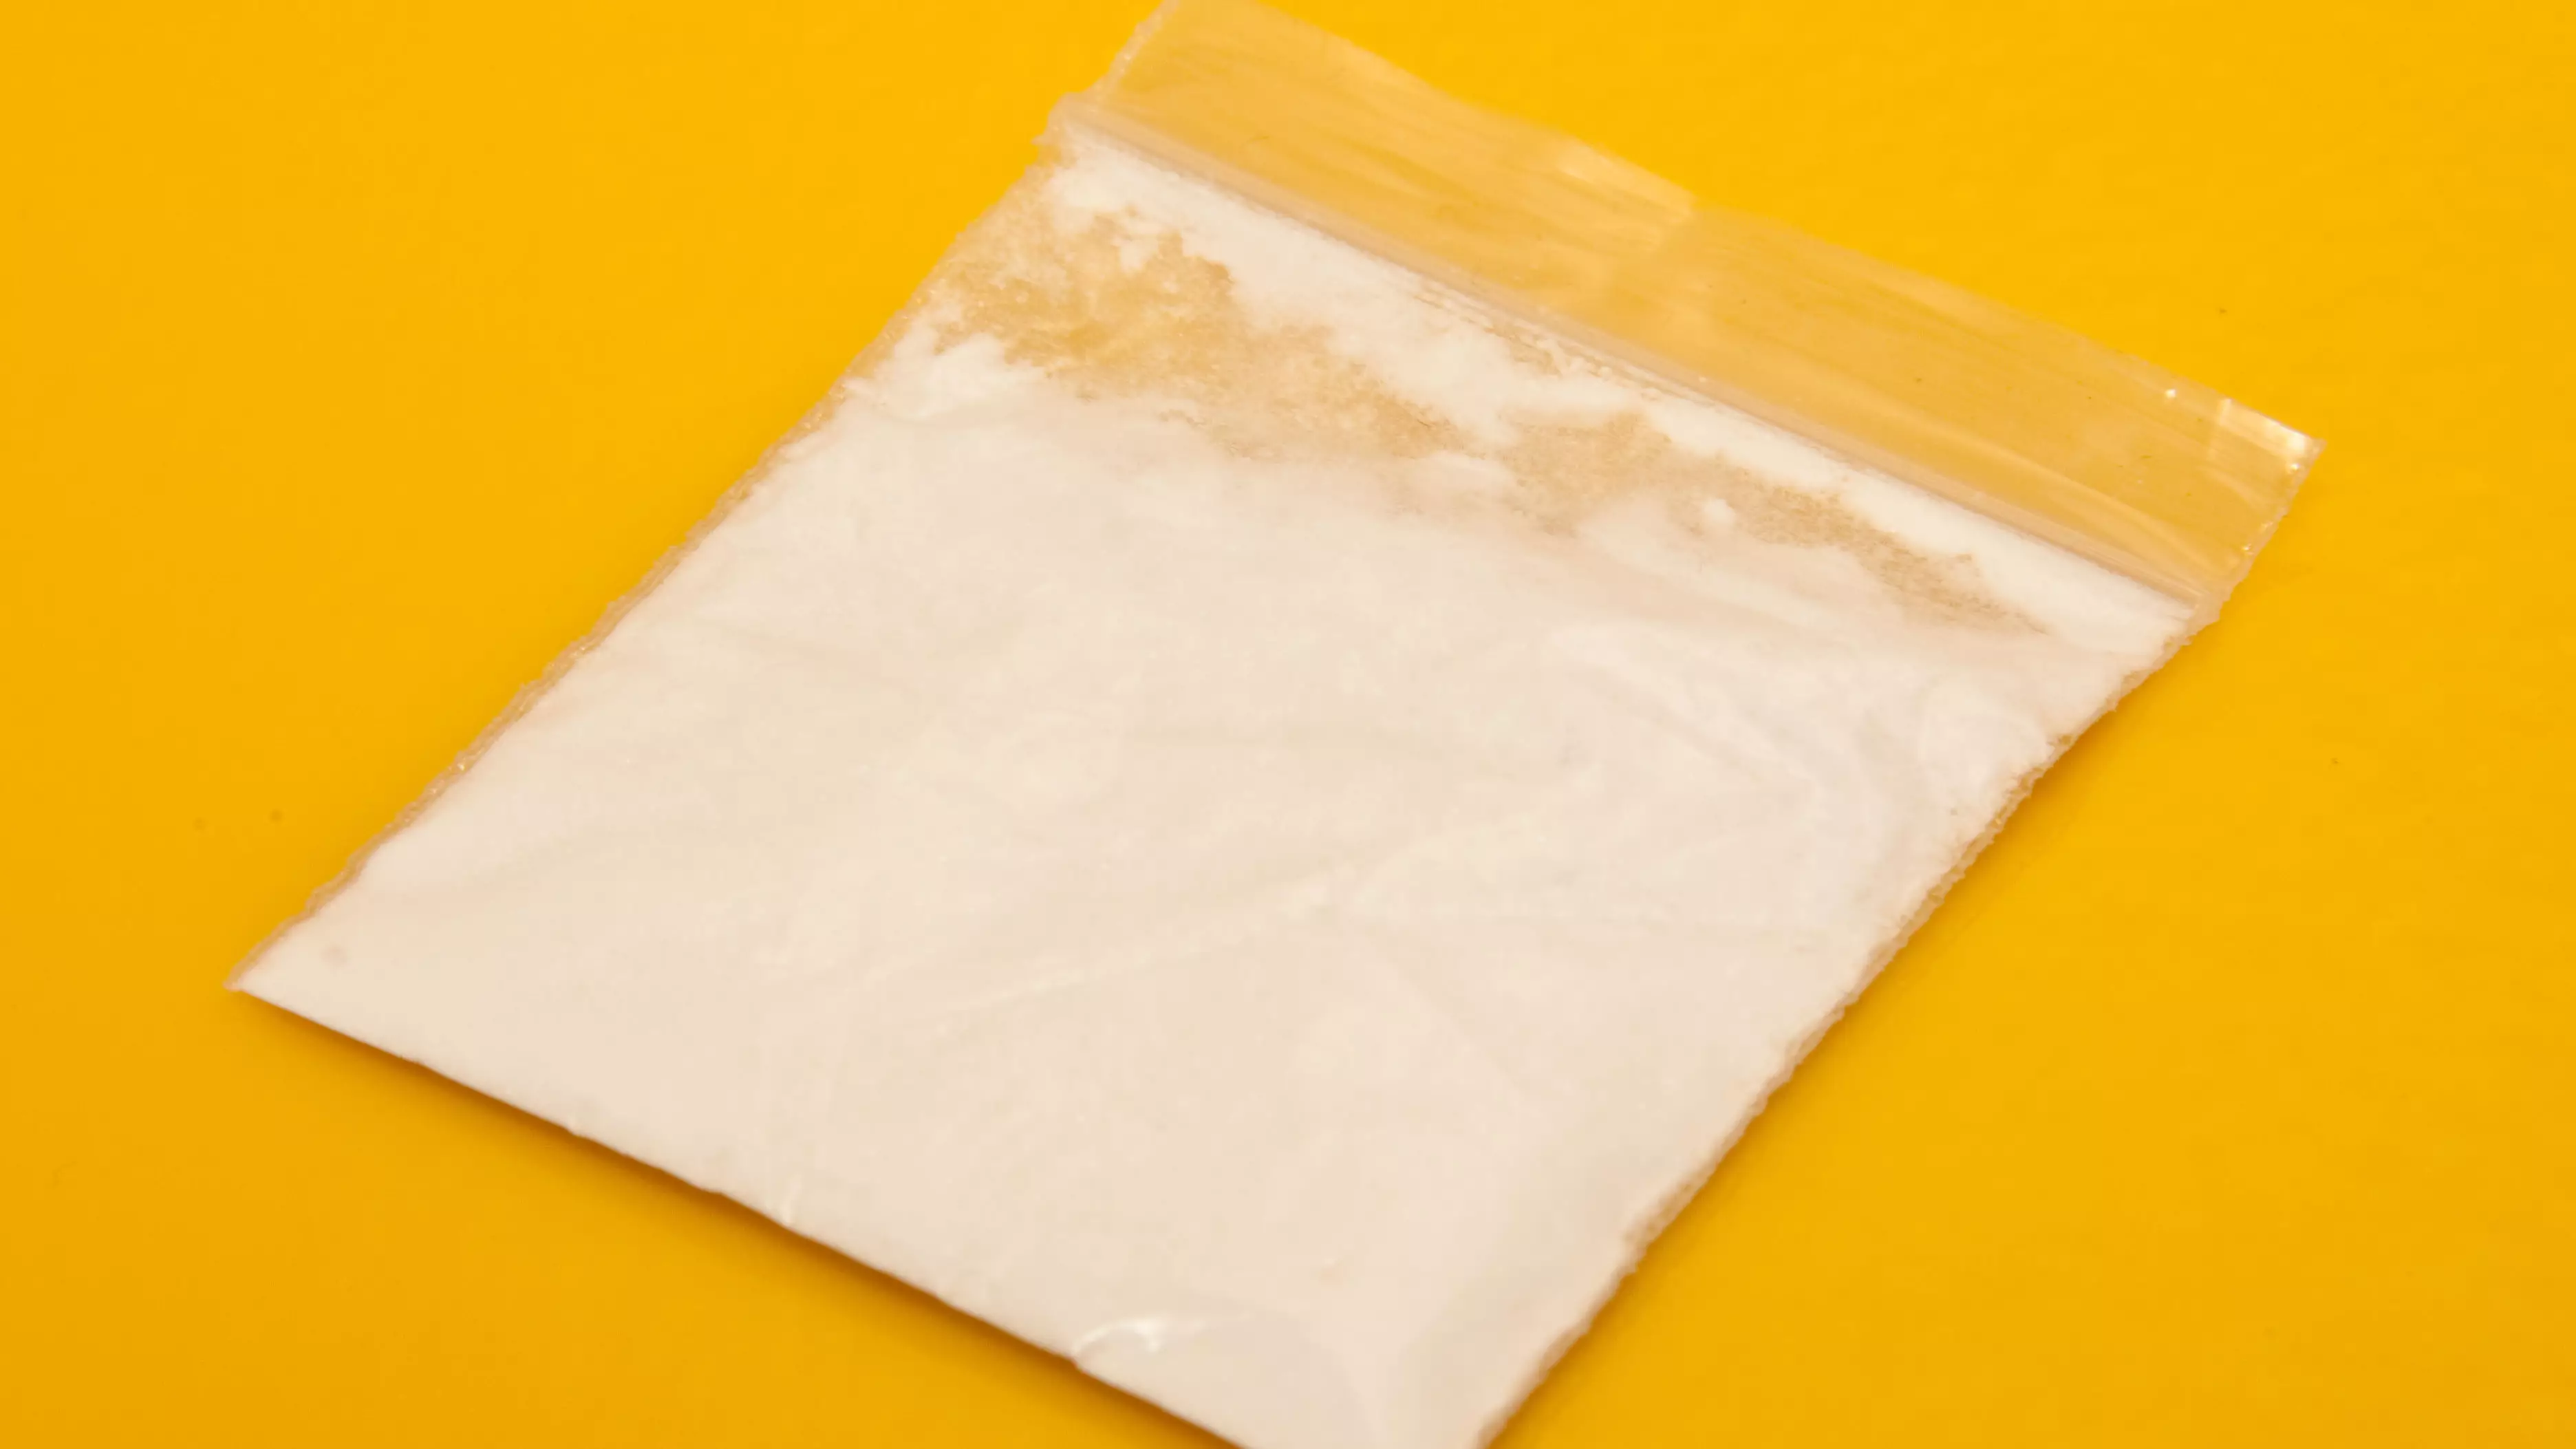 MDMA Being Sold In Melbourne Found To Have 'Dr Death' Chemical